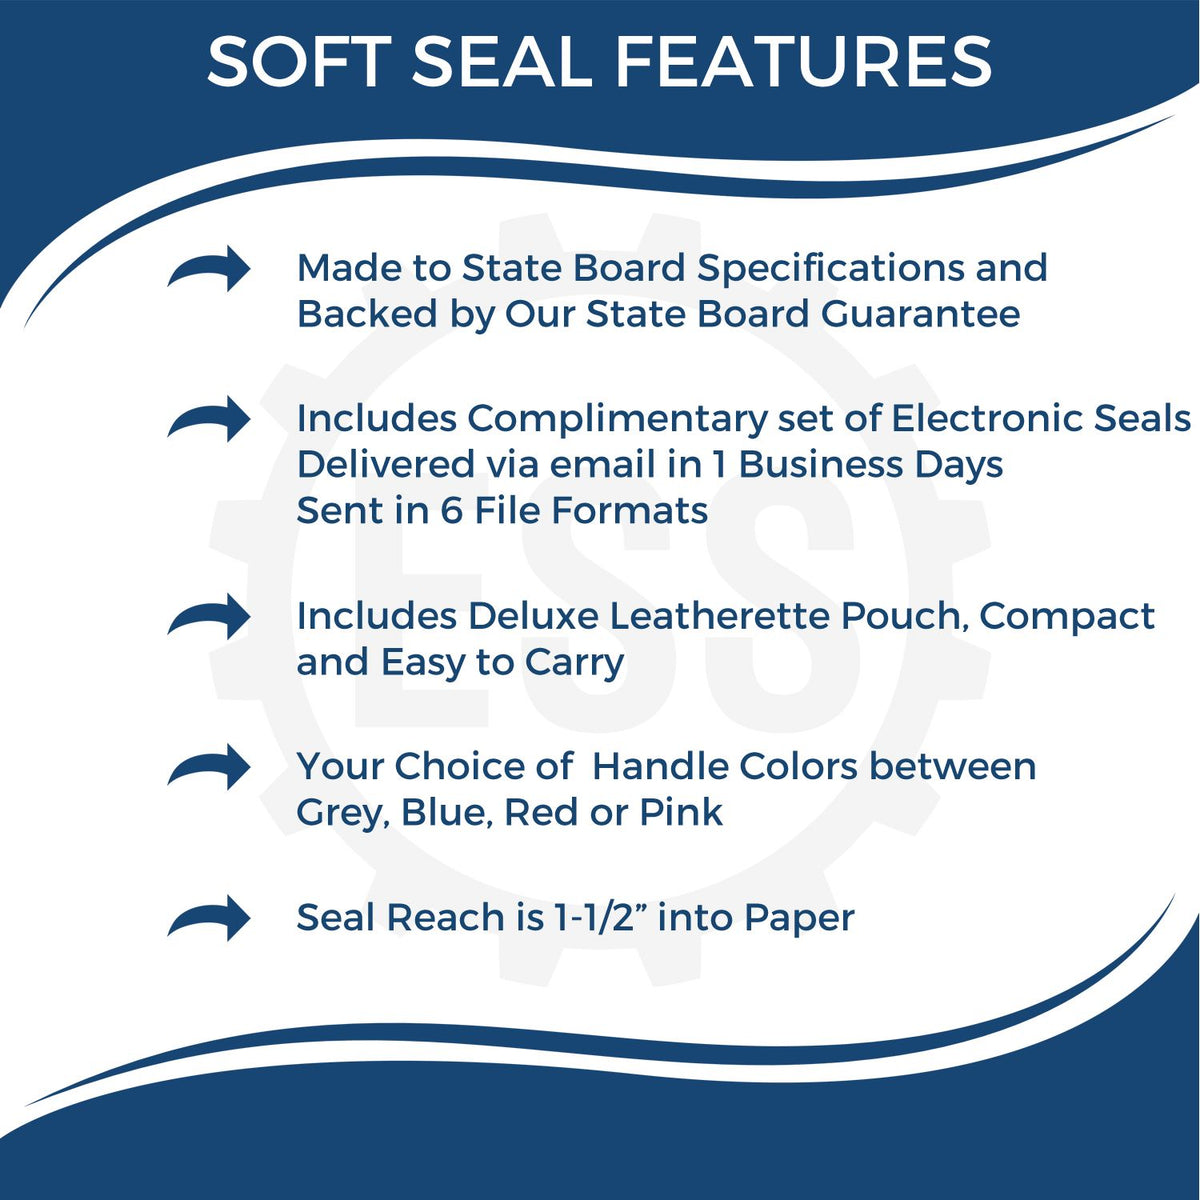 A picture of an infographic highlighting the selling points for the Soft Kentucky Professional Engineer Seal